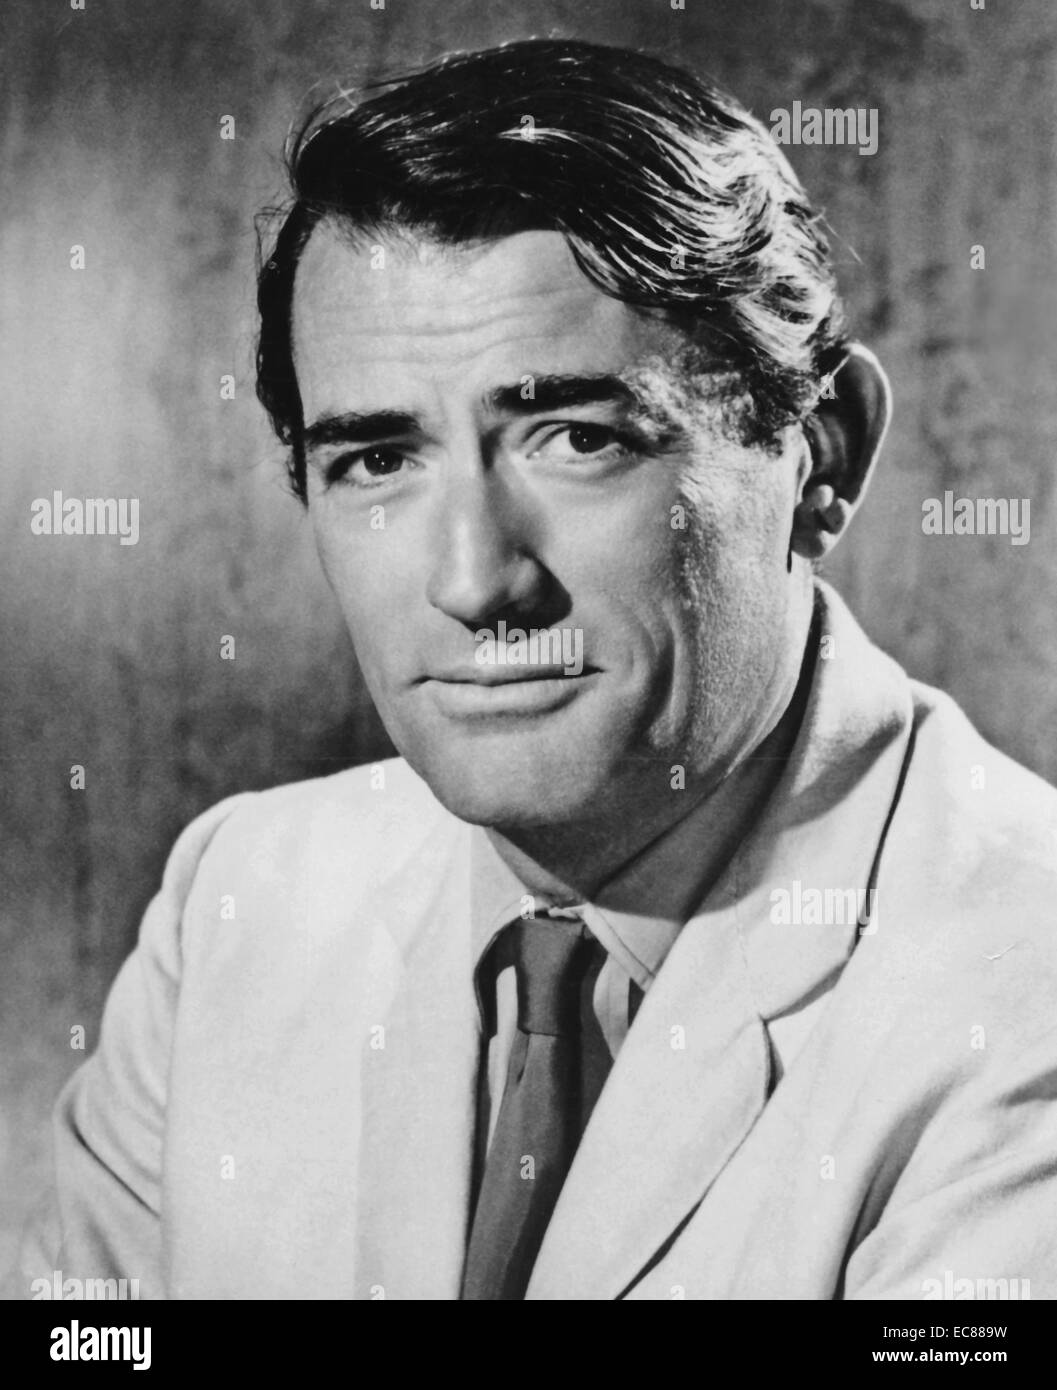 Photograph of Gregory Peck (1916-2003) American actor. Dated 1966 Stock Photo